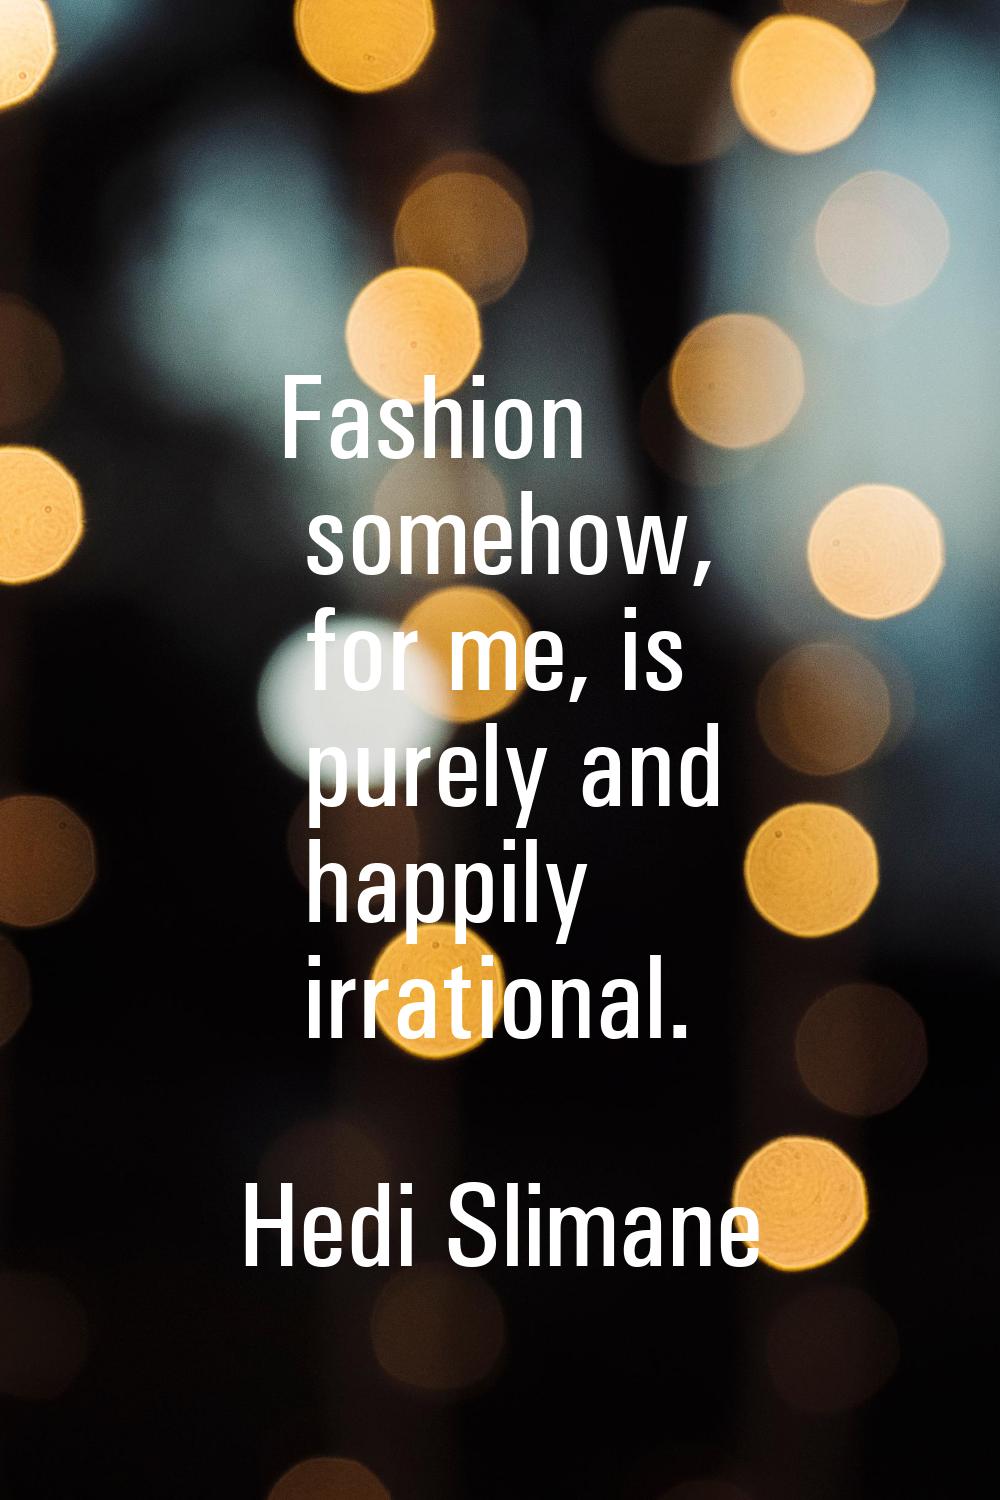 Fashion somehow, for me, is purely and happily irrational.